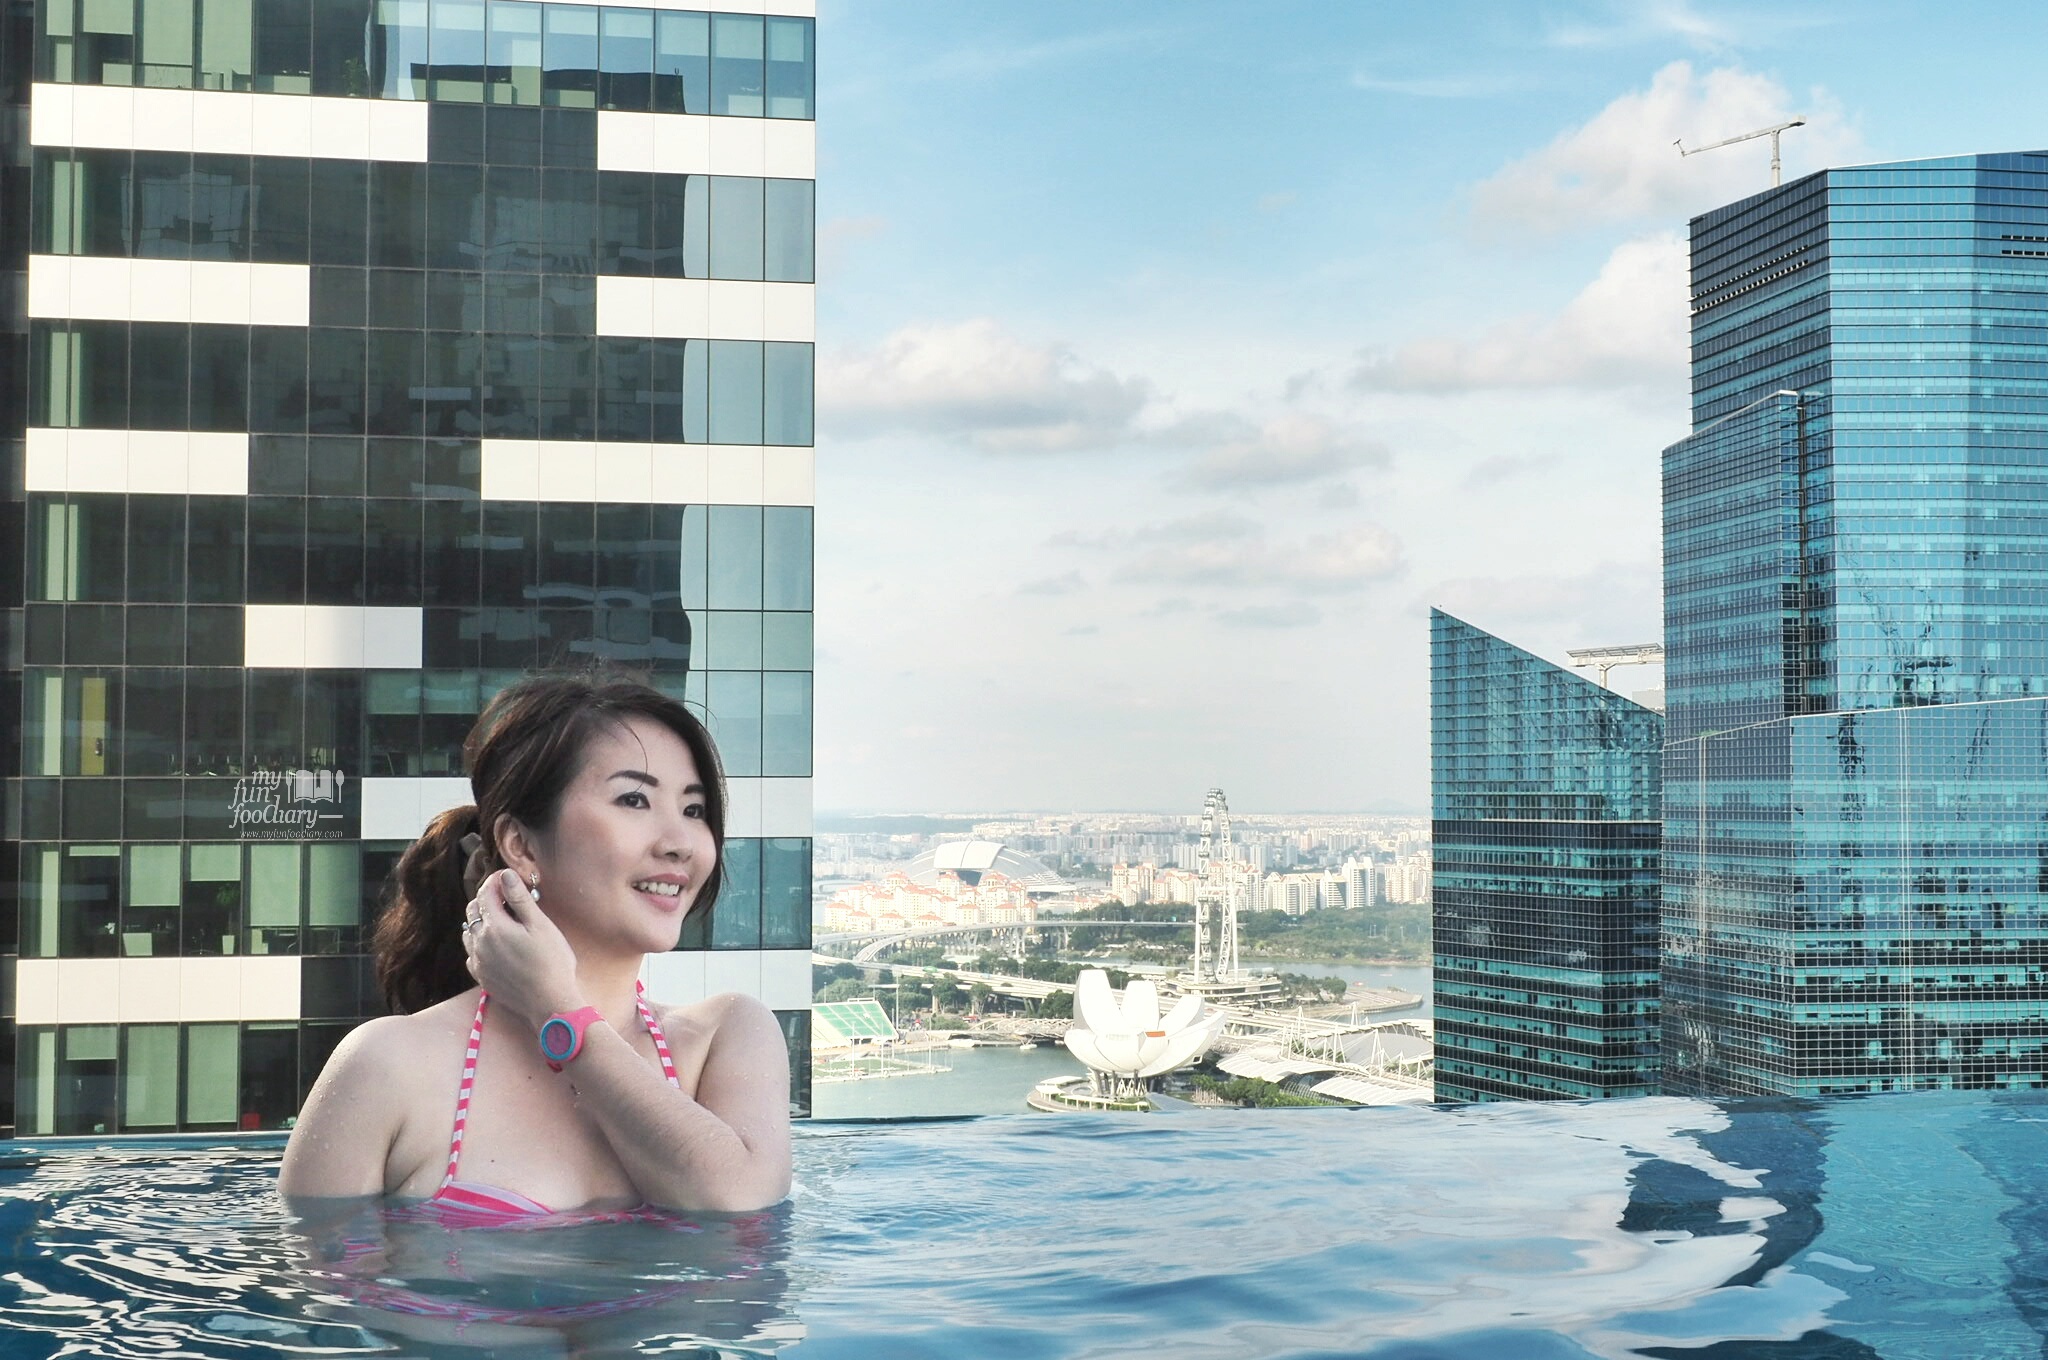 Mullie at the Infinity Pool with view to Marina Bay - Westin Singapore by Myfunfoodiary